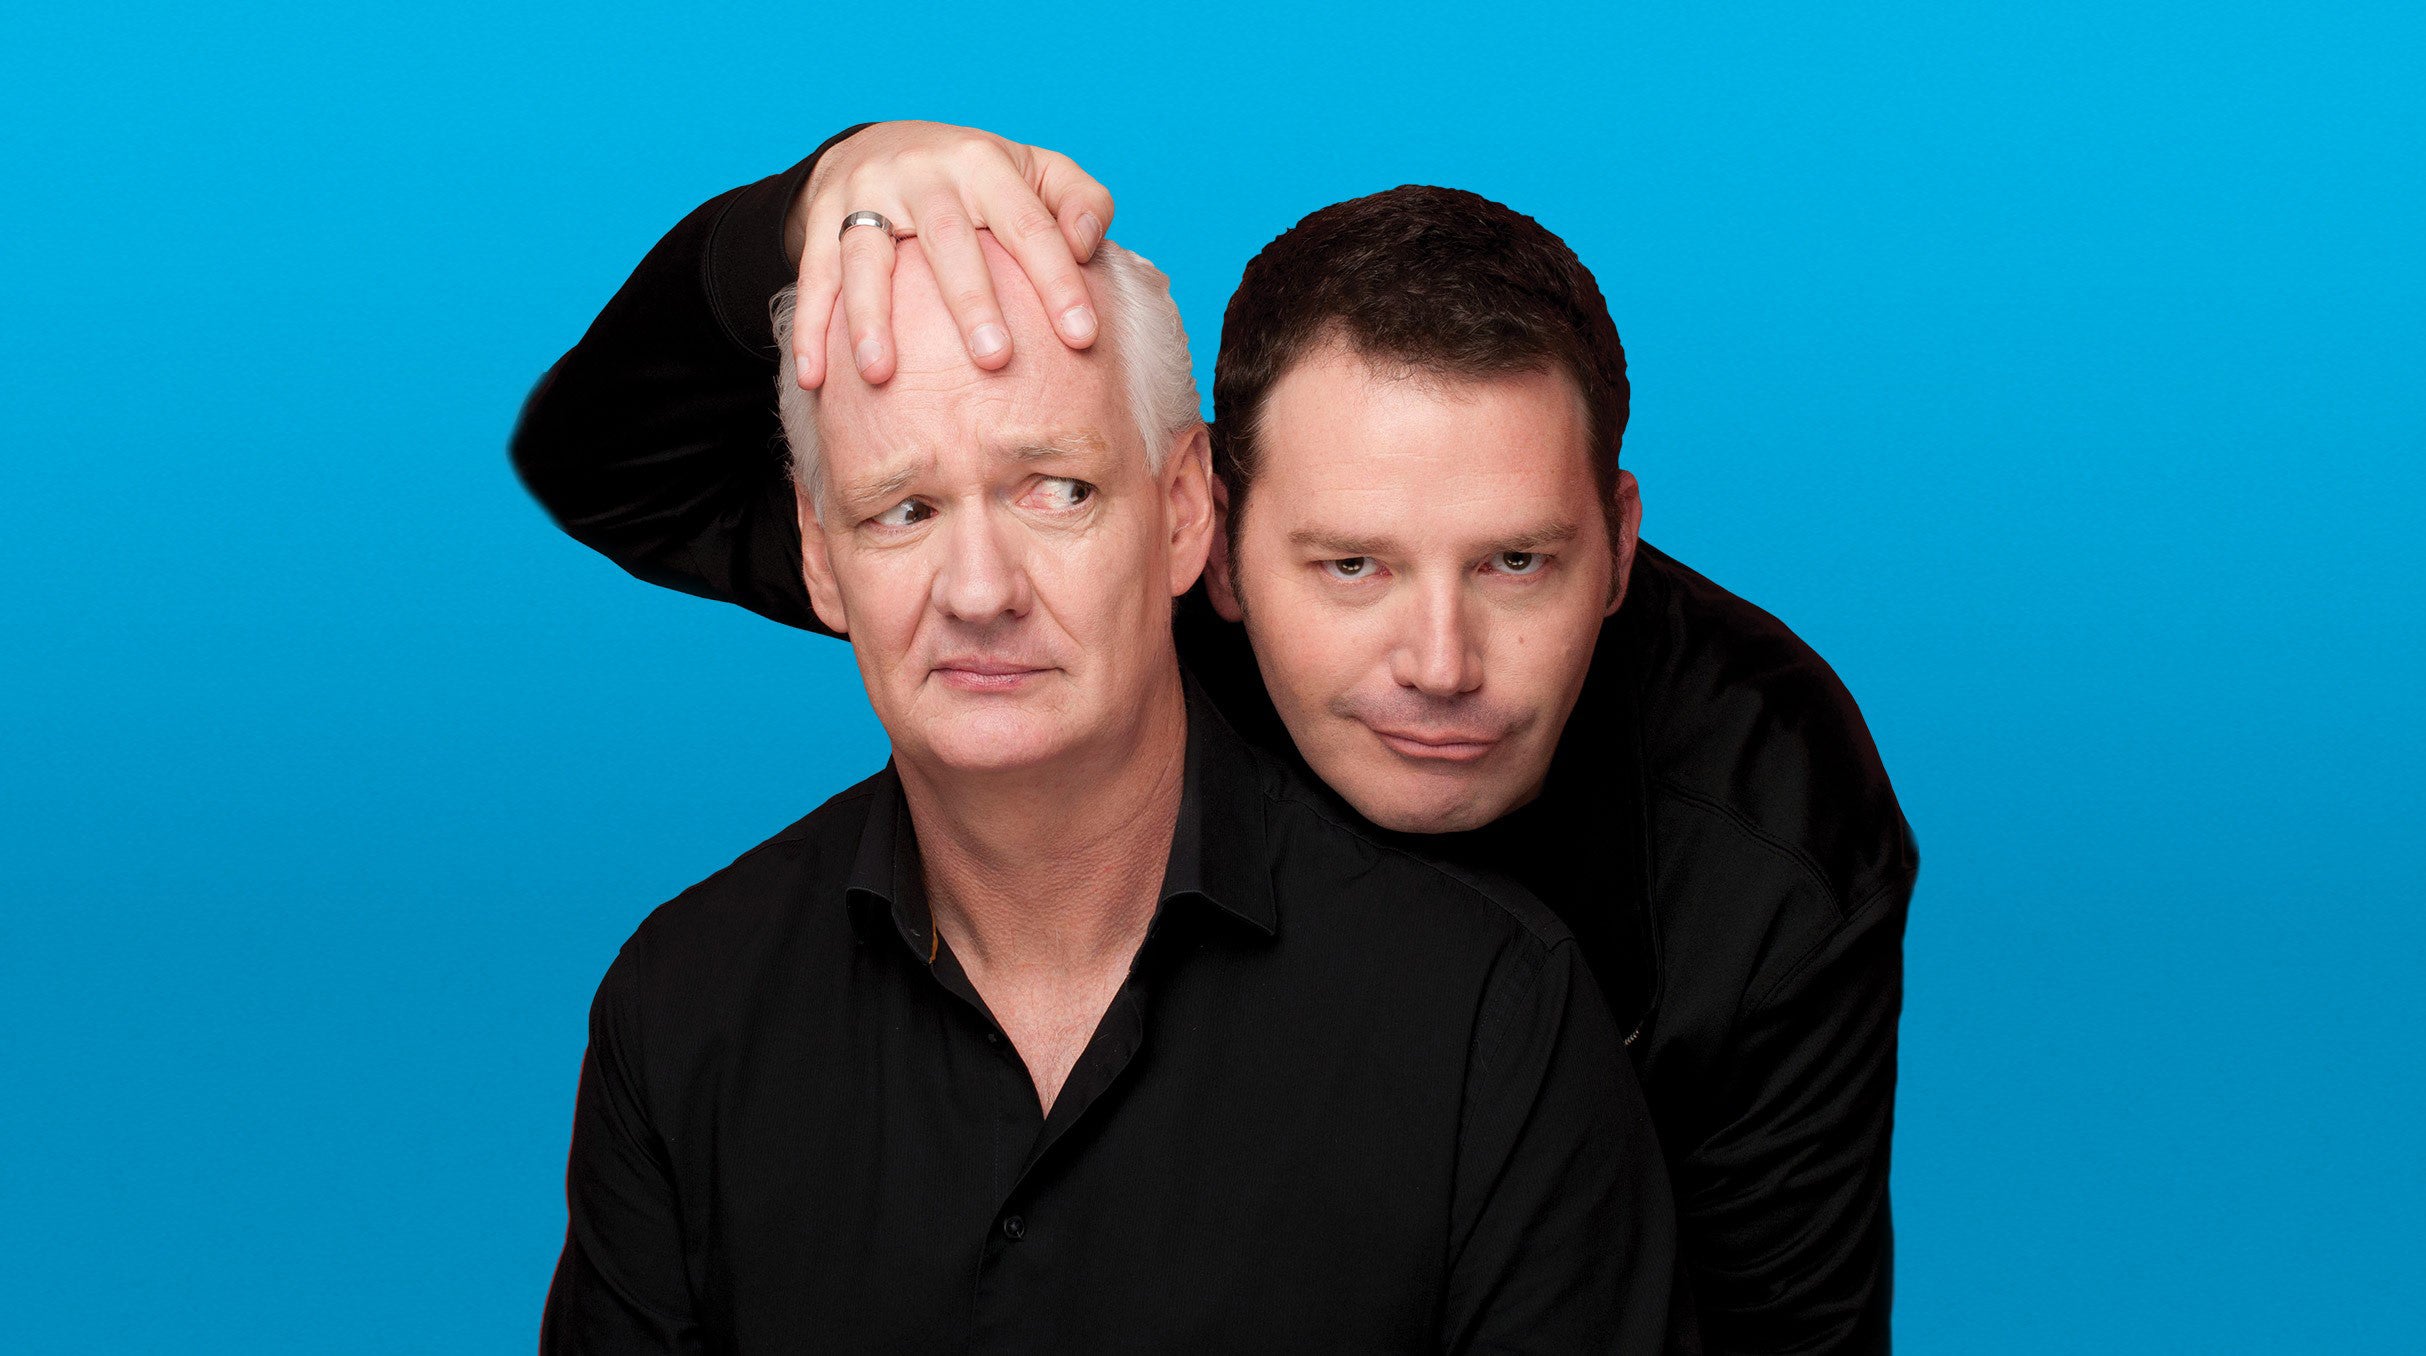 Colin Mochrie & Brad Sherwood: Asking for Trouble in Joliet promo photo for Exclusive presale offer code